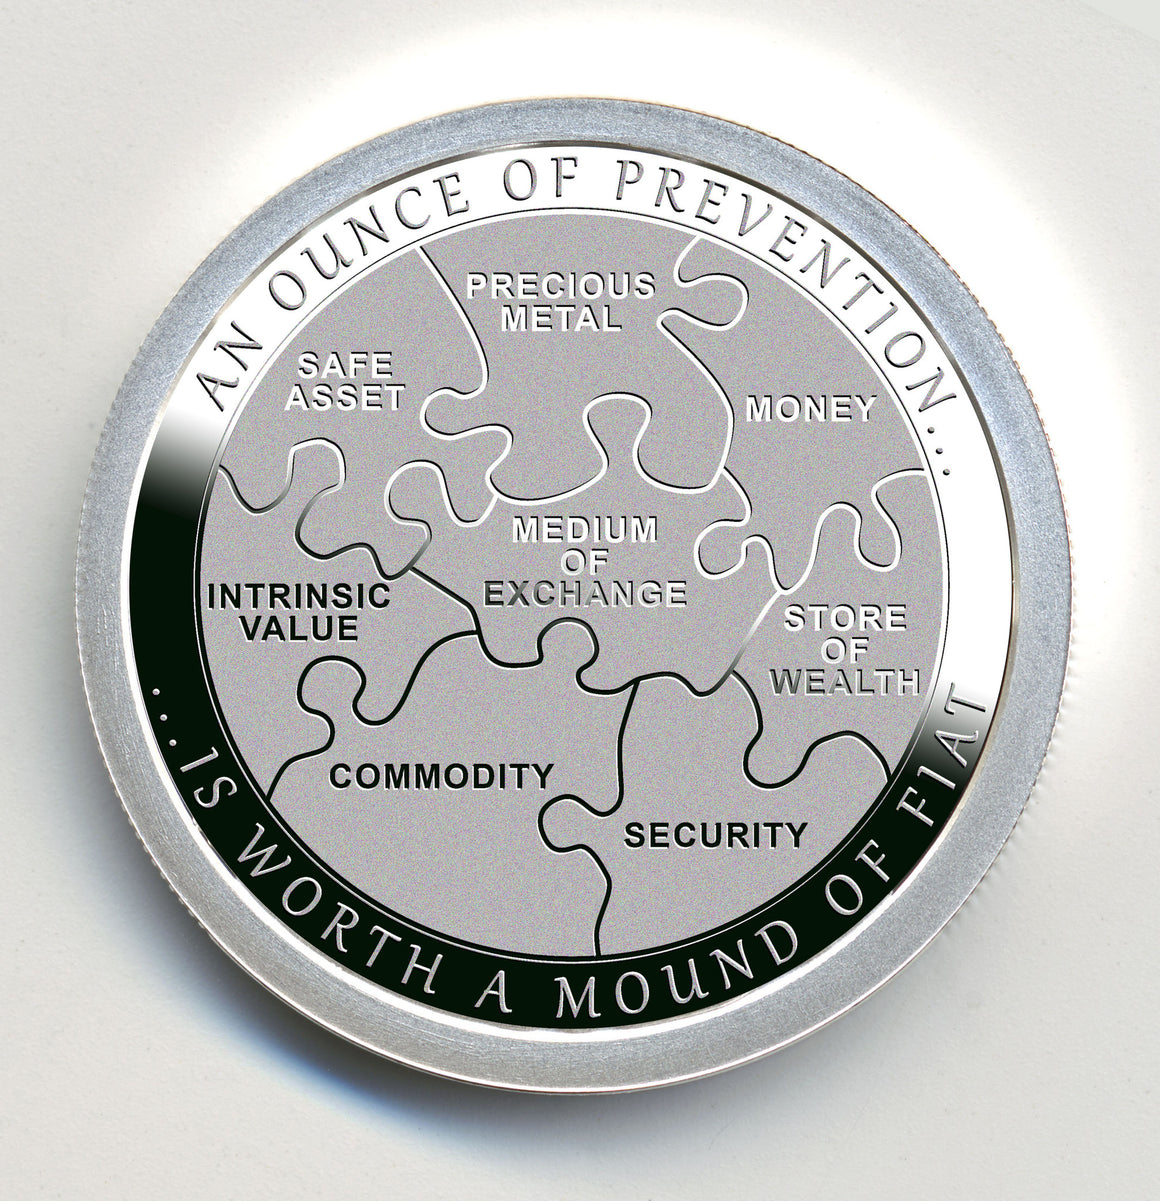 Ounce of Prevention - Security by Chautauqua Silver Works, 1oz .999 Fine Silver Round